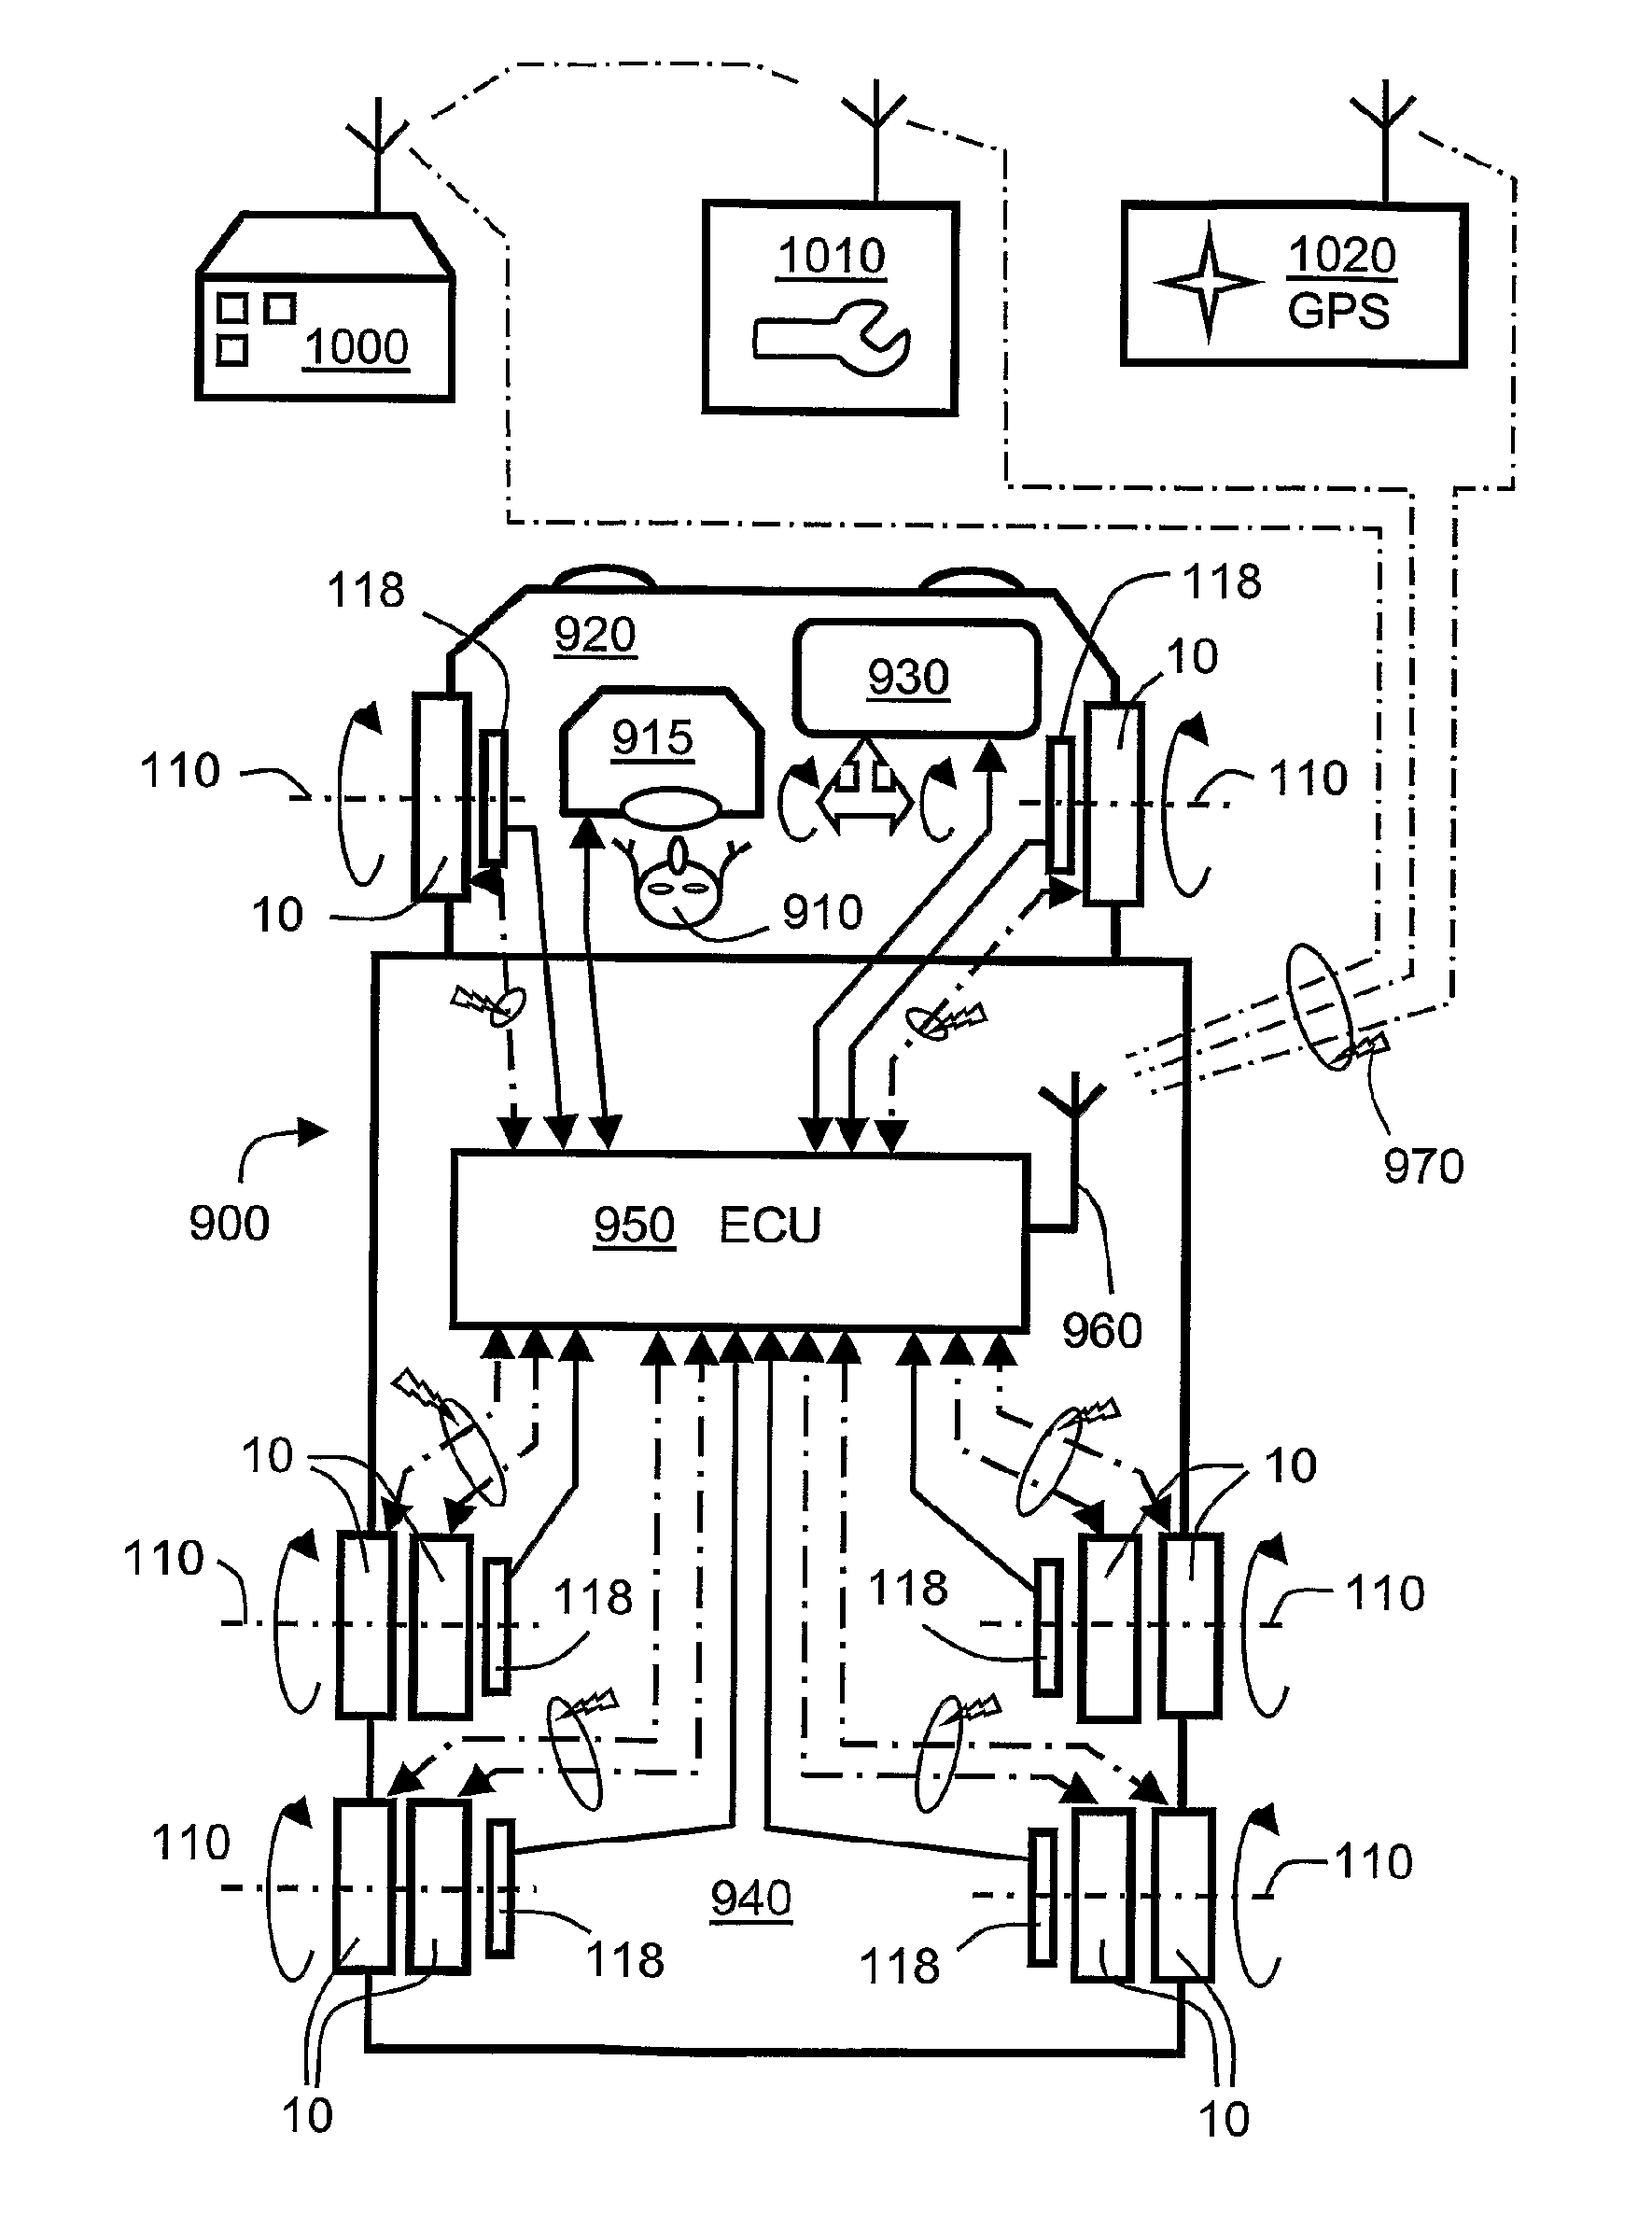 Method of identifying positions of wheel modules